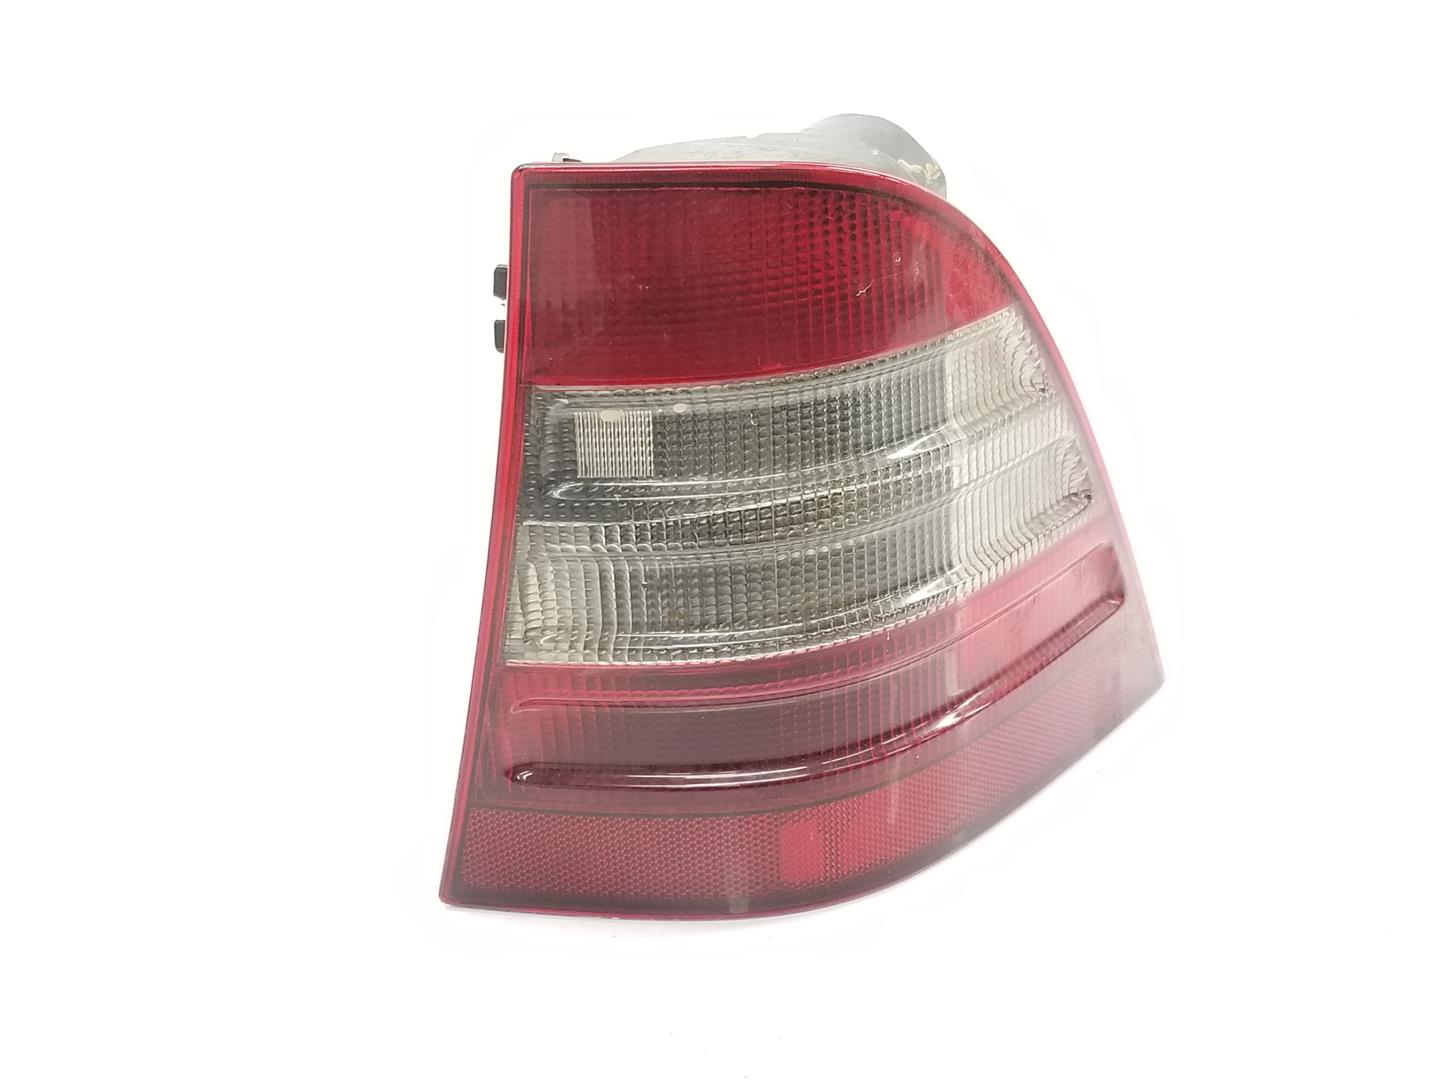 MERCEDES-BENZ M-Class W163 (1997-2005) Rear Right Taillight Lamp A1638200264, A1638200077 21074767